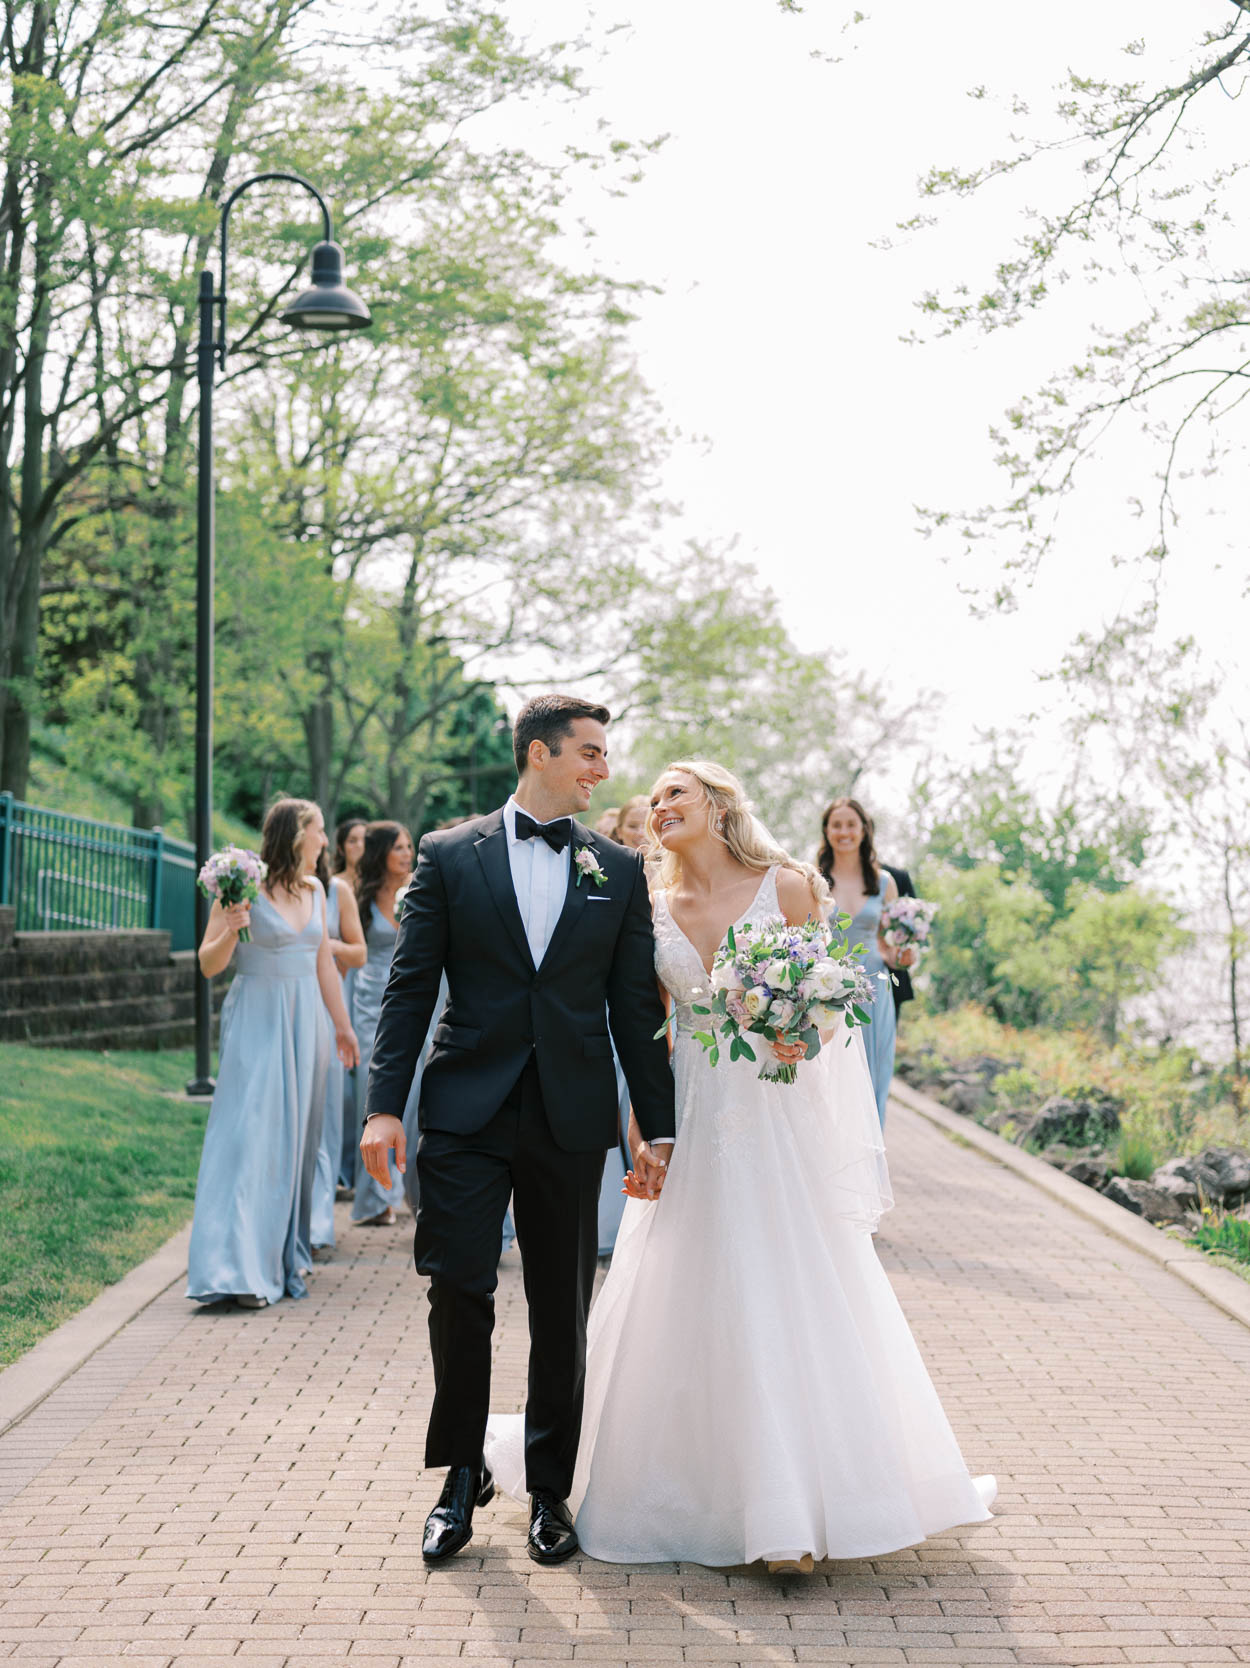 Bridal party portraits at Lakewood Park in Cleveland, Ohio